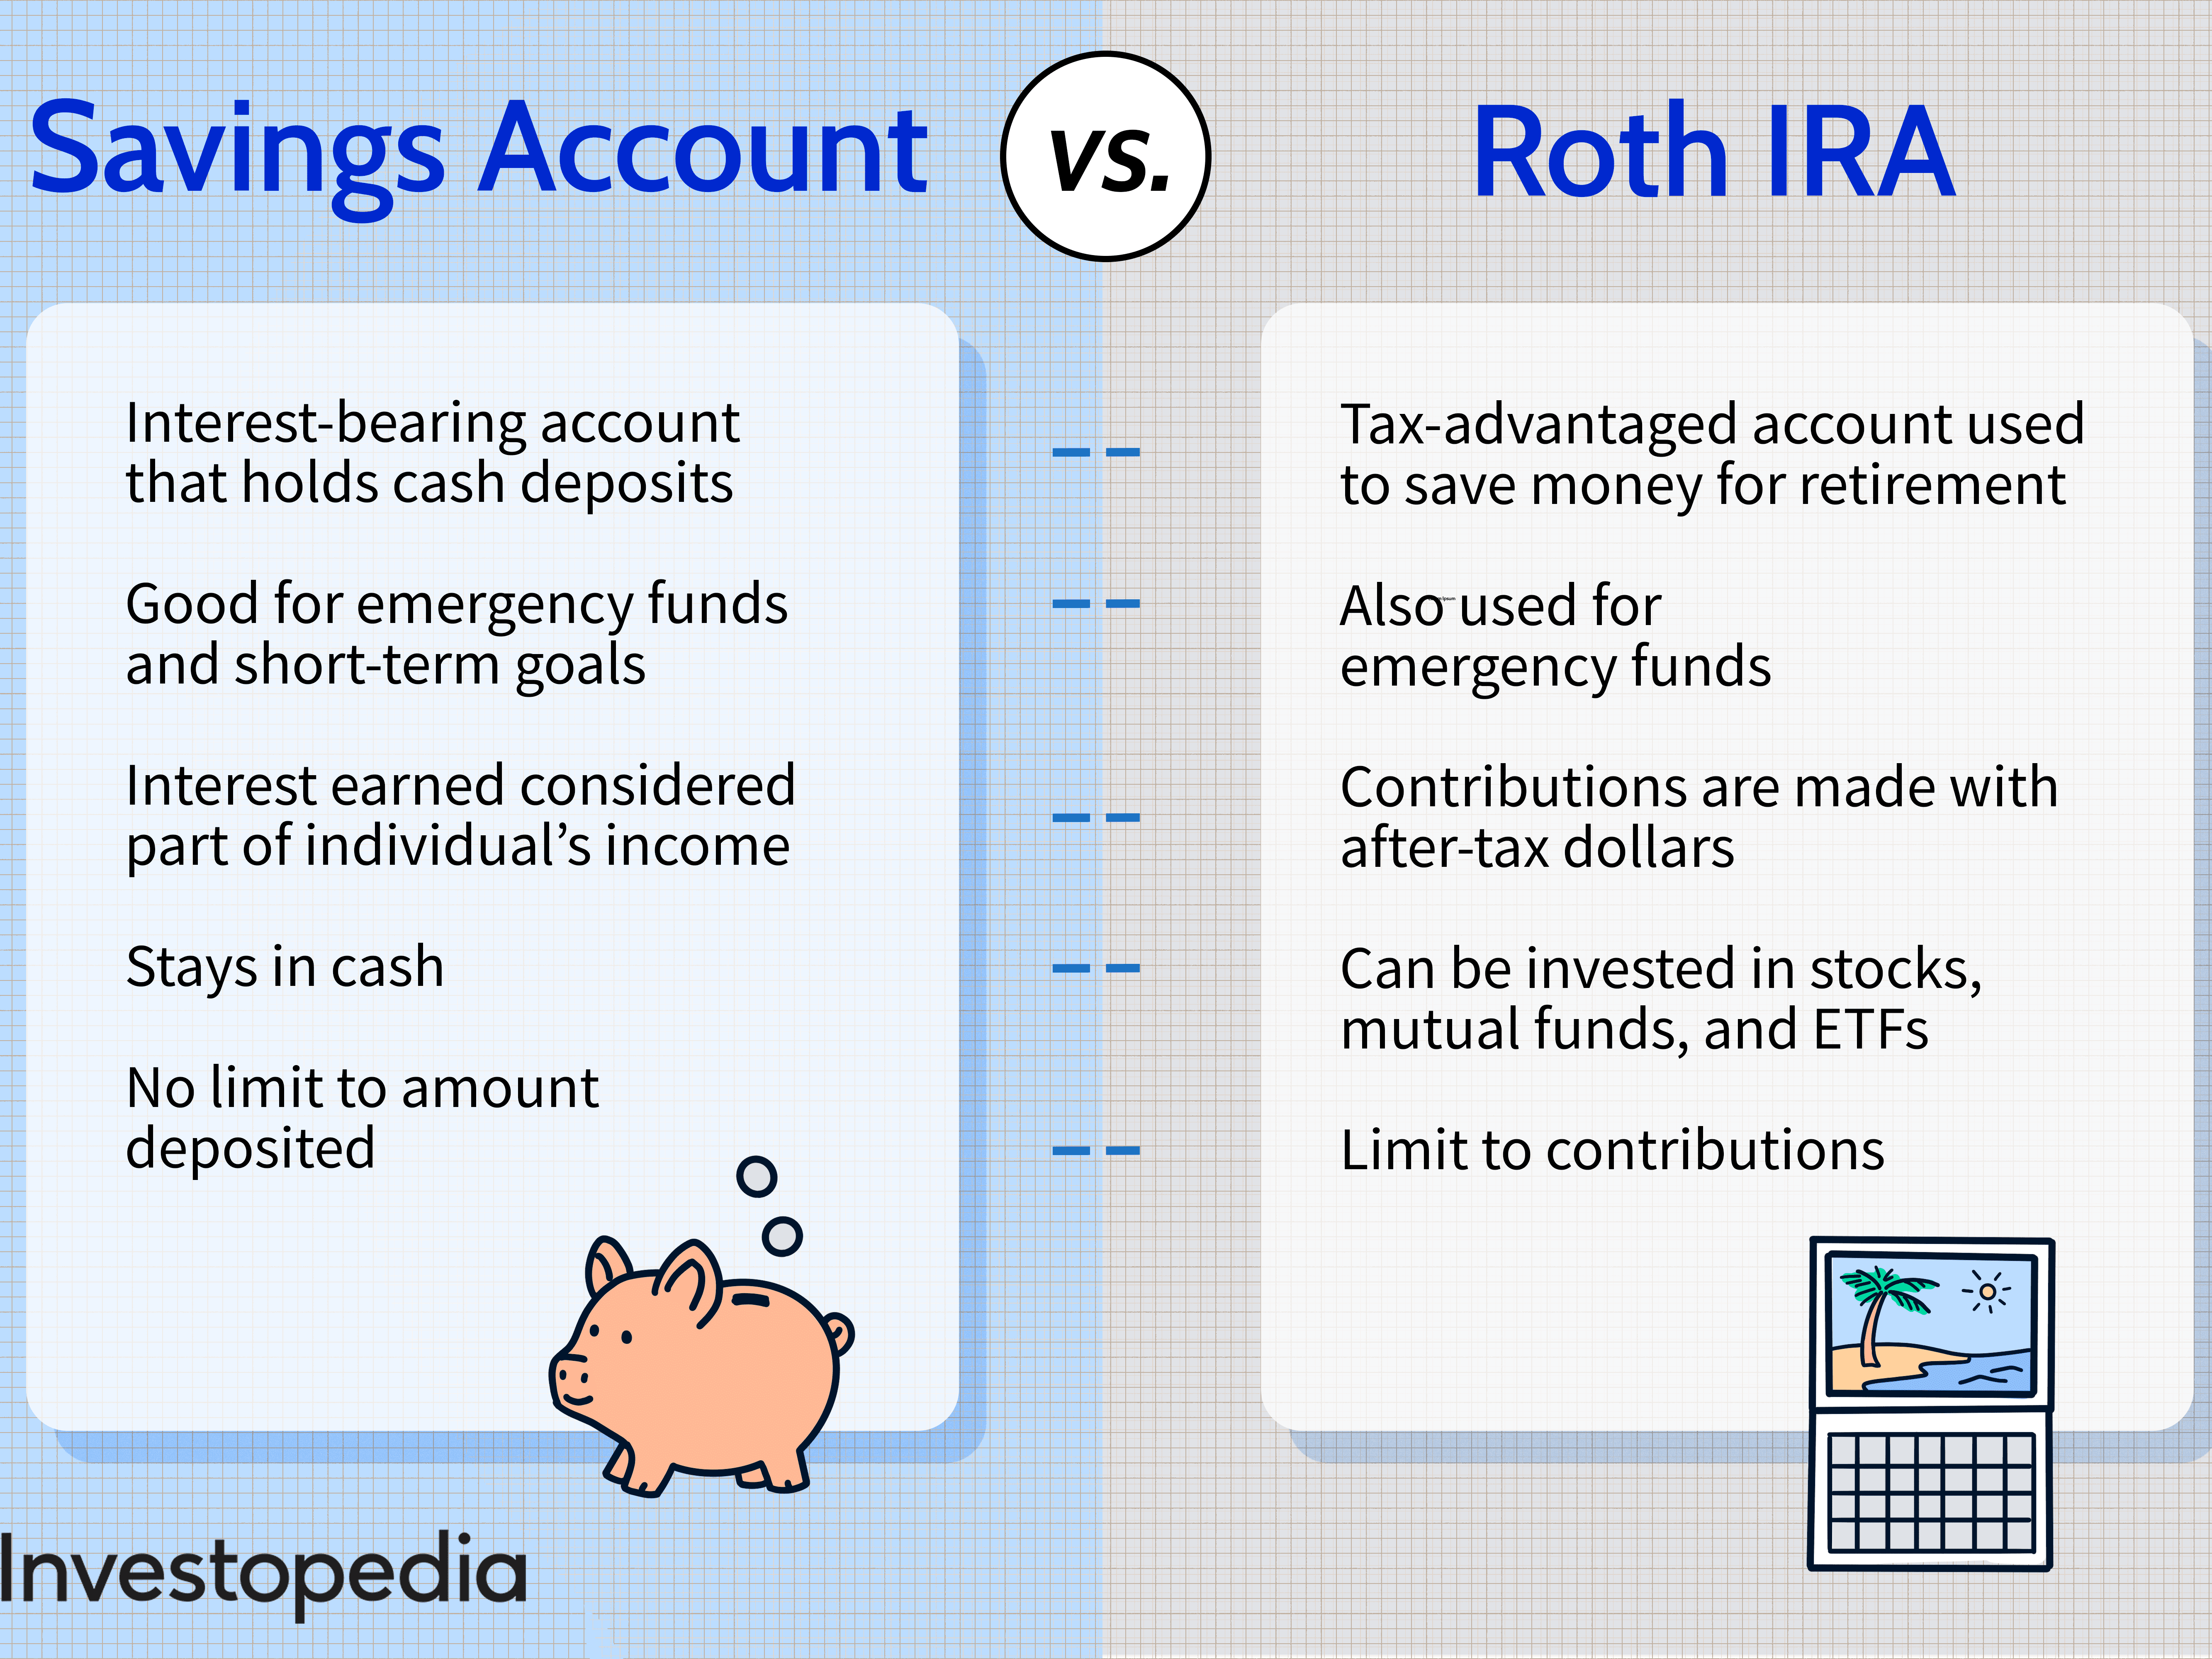 What are the downsides of a Roth IRA?